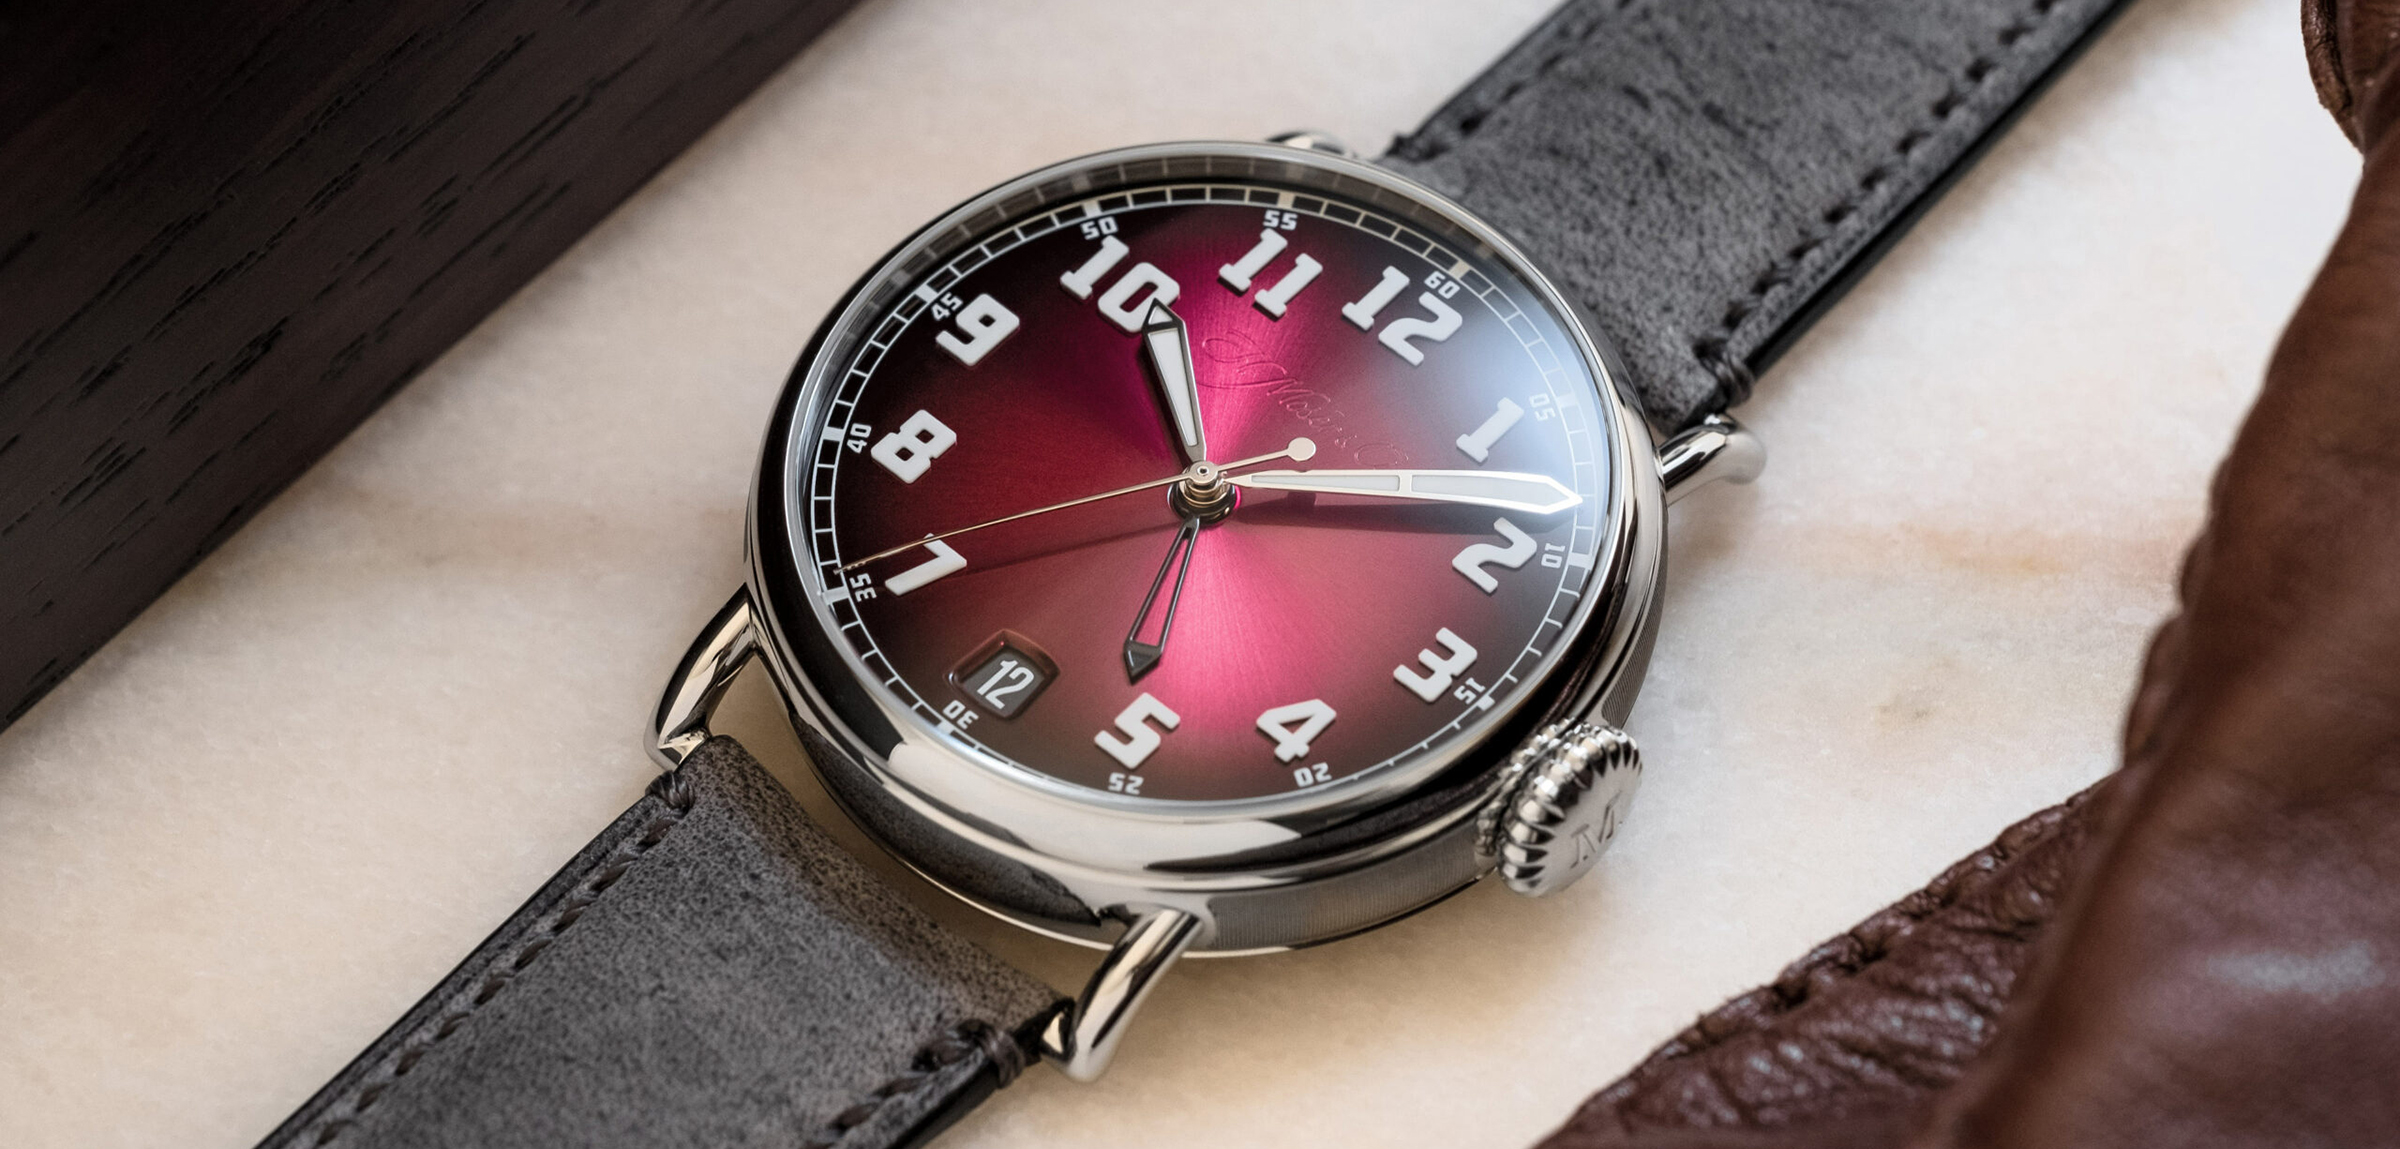 H. Moser & Cie. Heritage Dual Time “Burgundy”